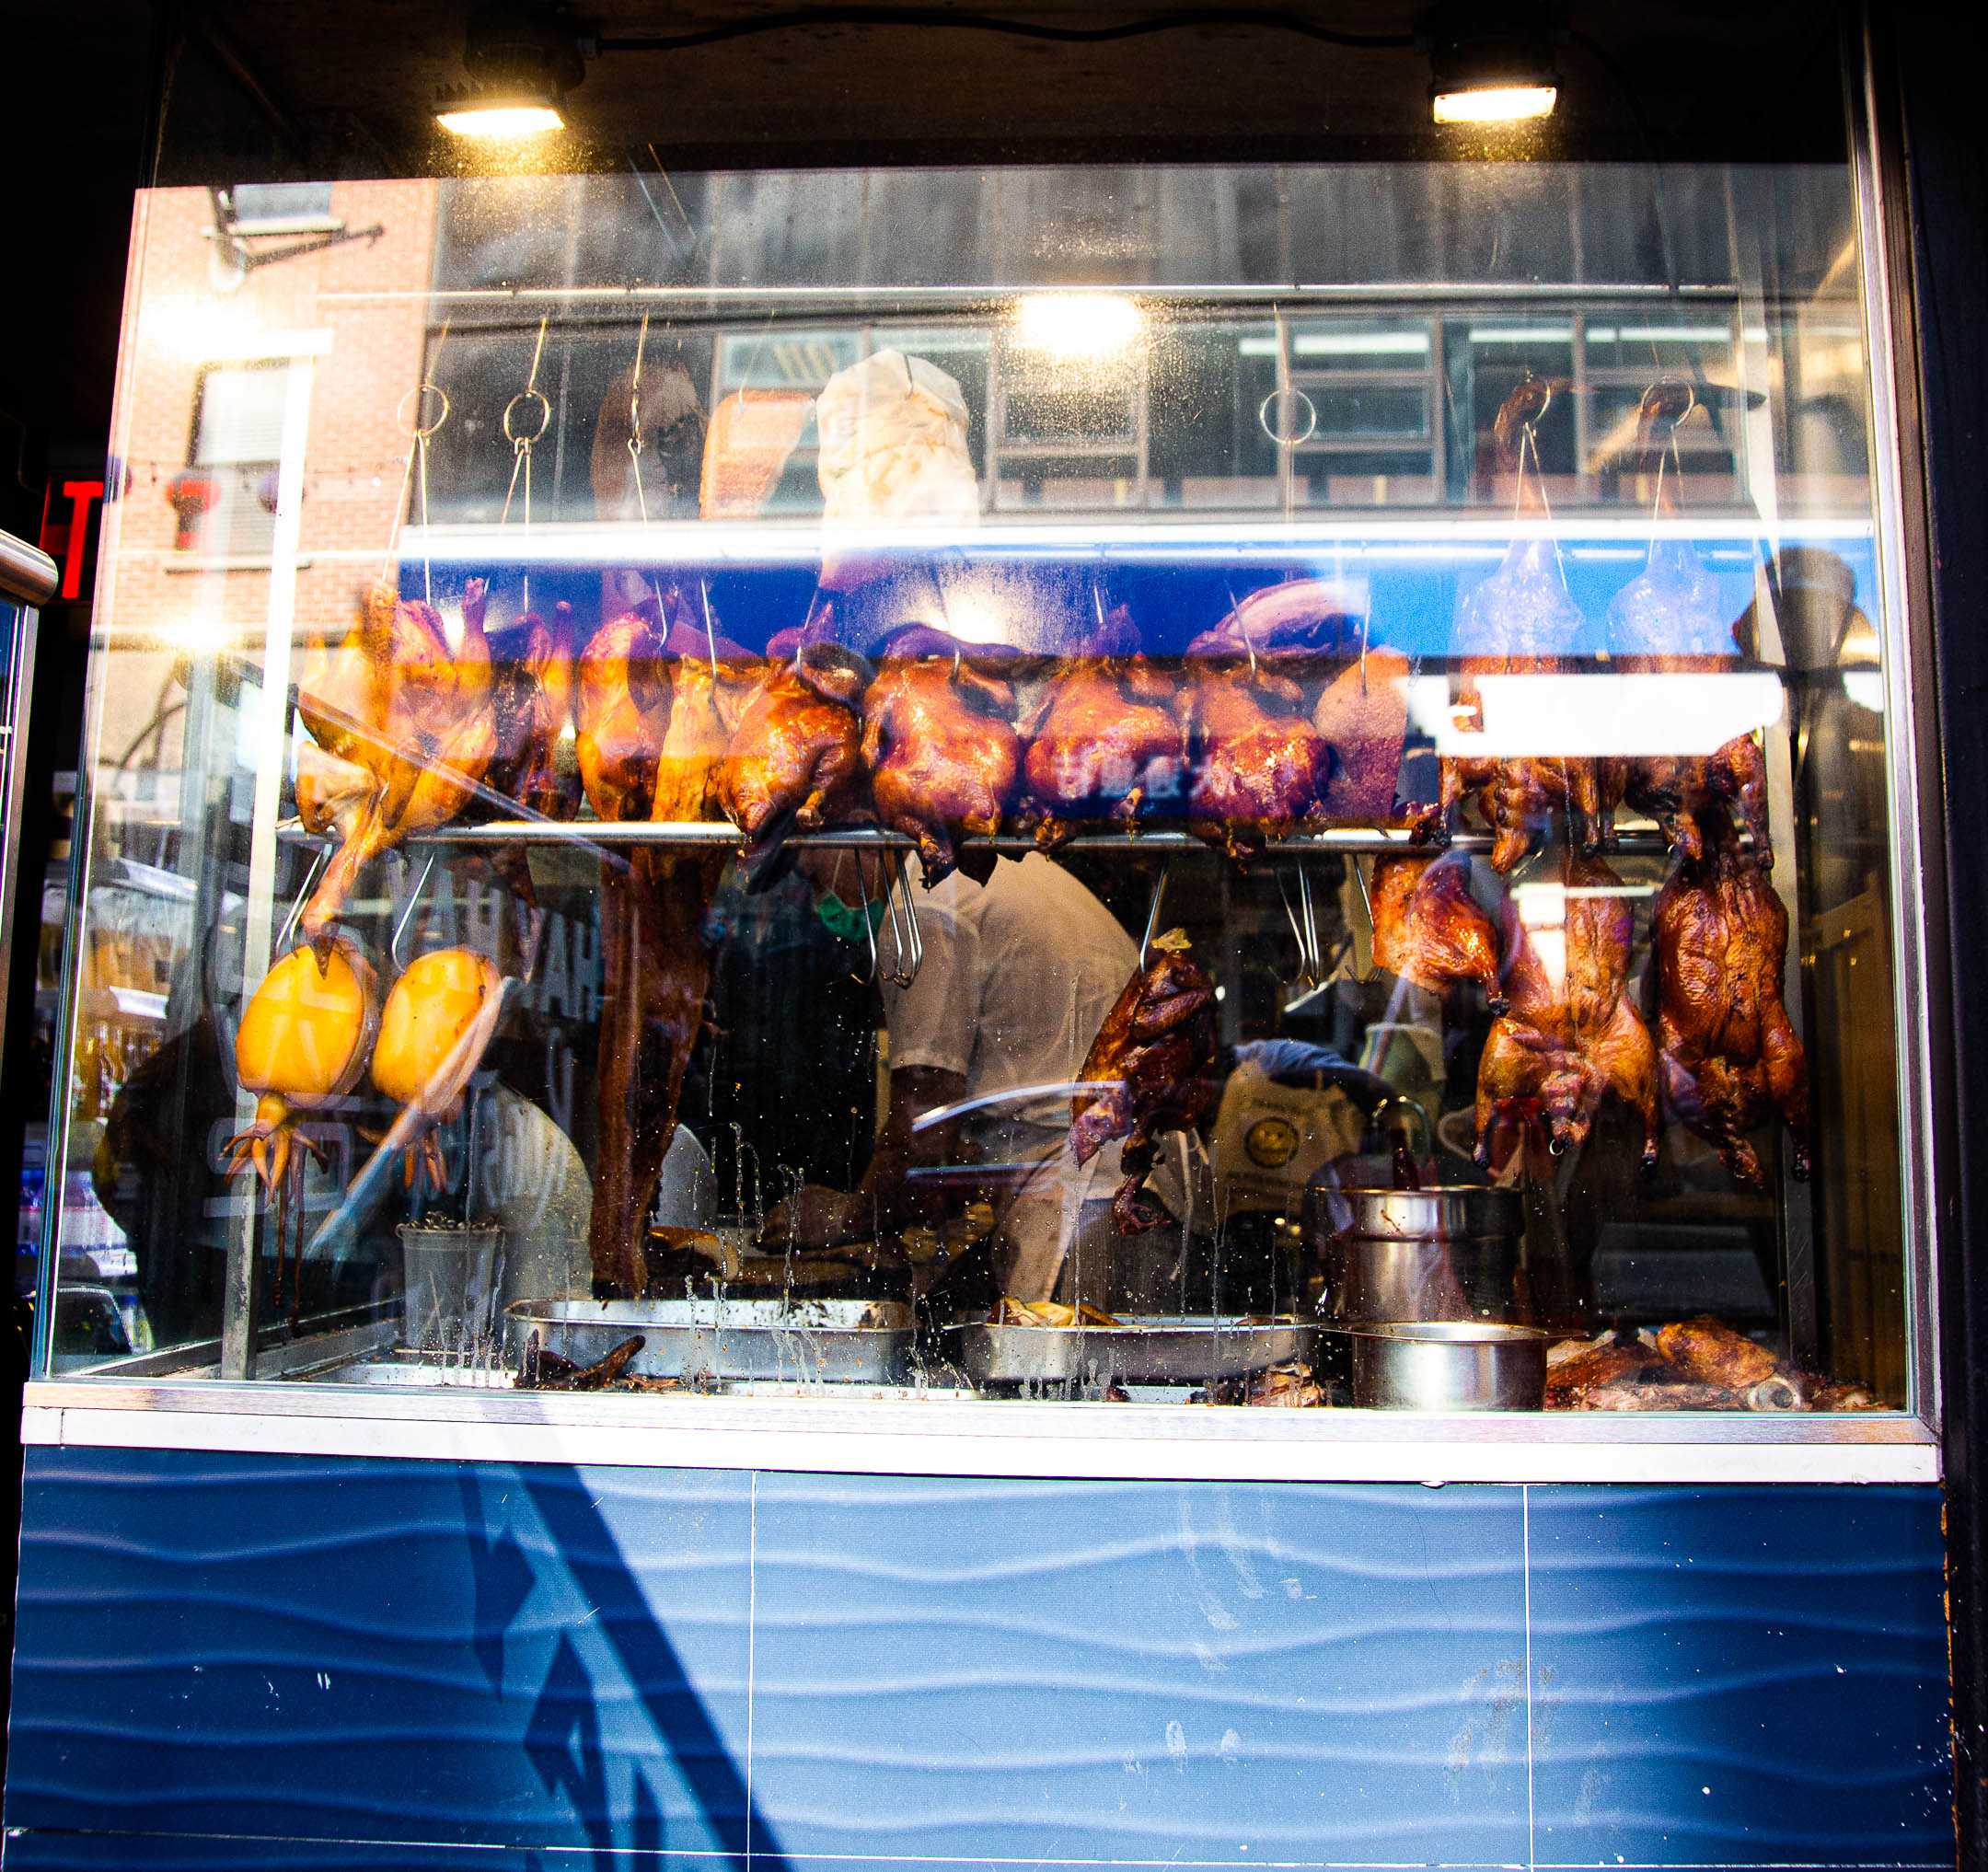 Various meats hang in a butcher's display case: duck, chicken, pork, and more. Lights from inside the butcher shop shine through the glass, and the apartment windows across the street reflect in the case. A person in a white shirt stands behind the case, working.